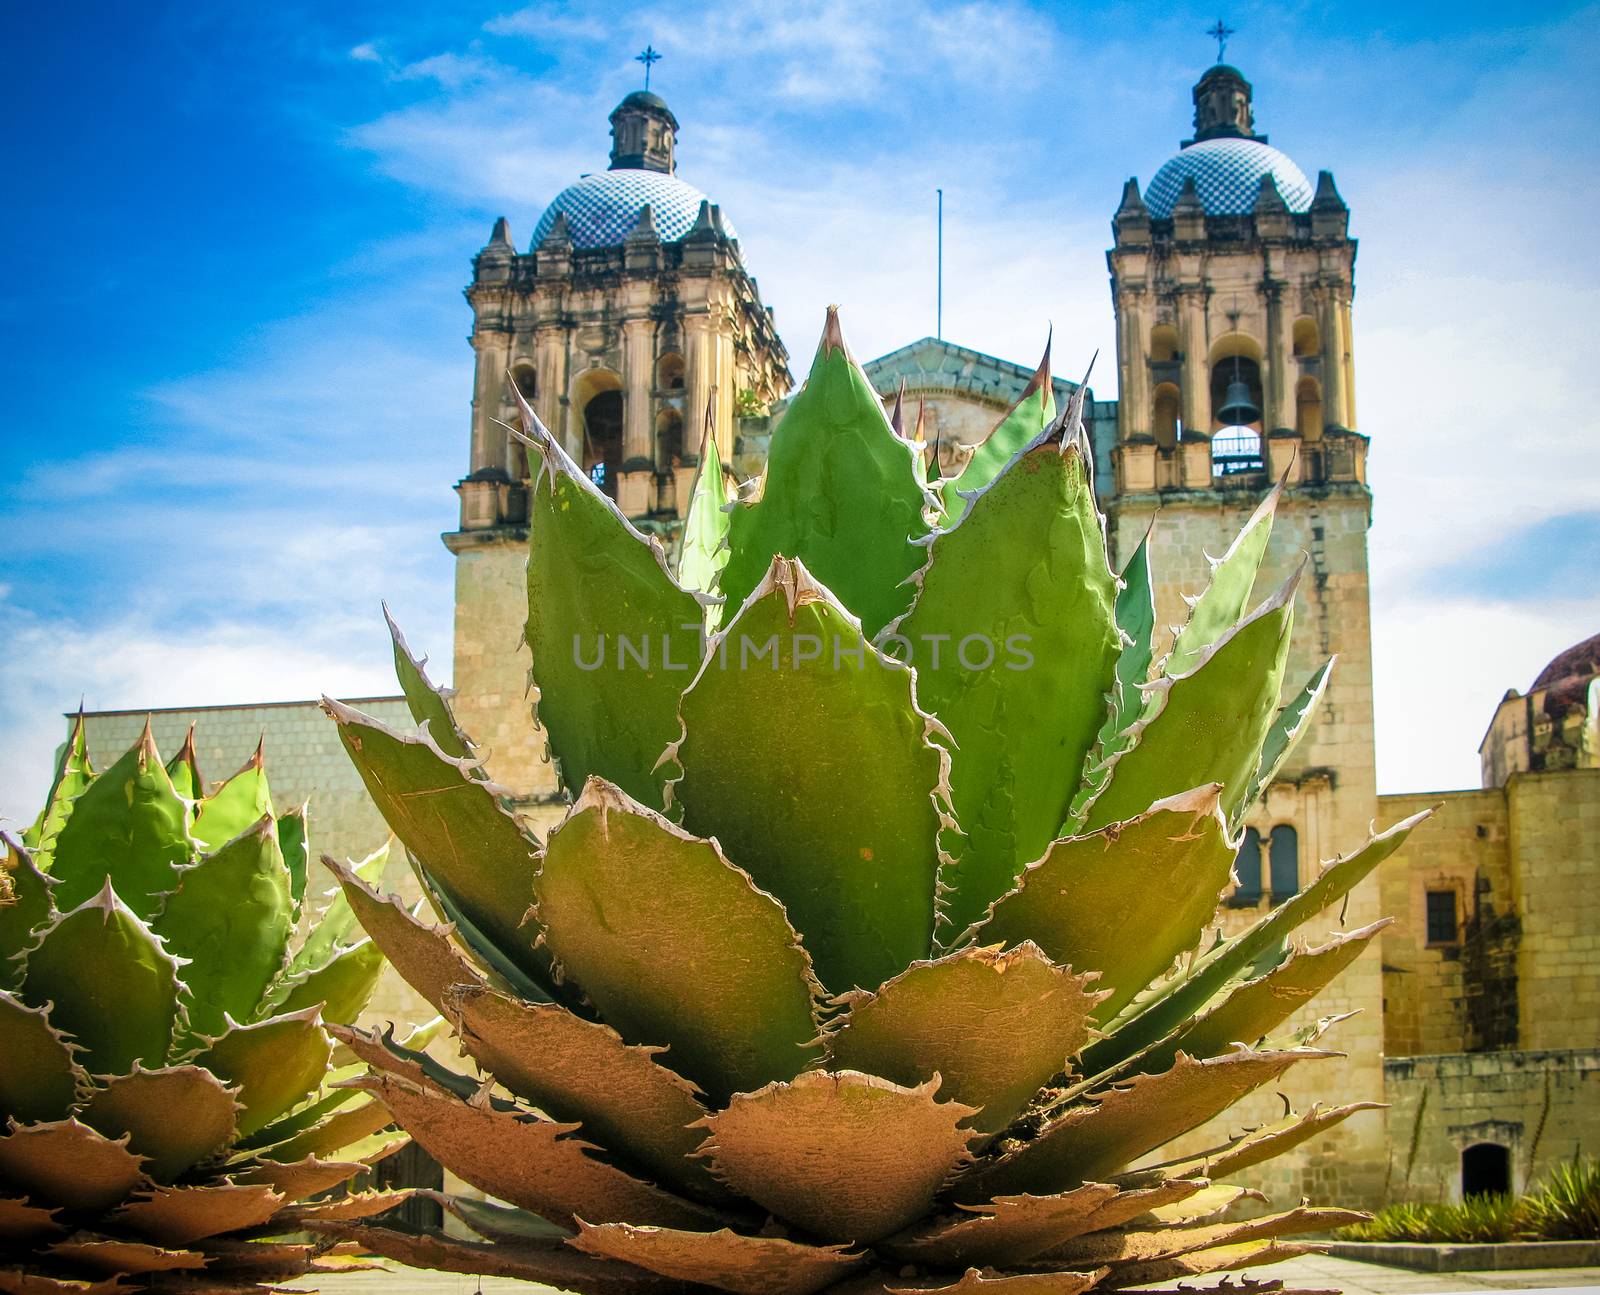 View to Oaxaca cathedral with agave plant Mexico by homocosmicos